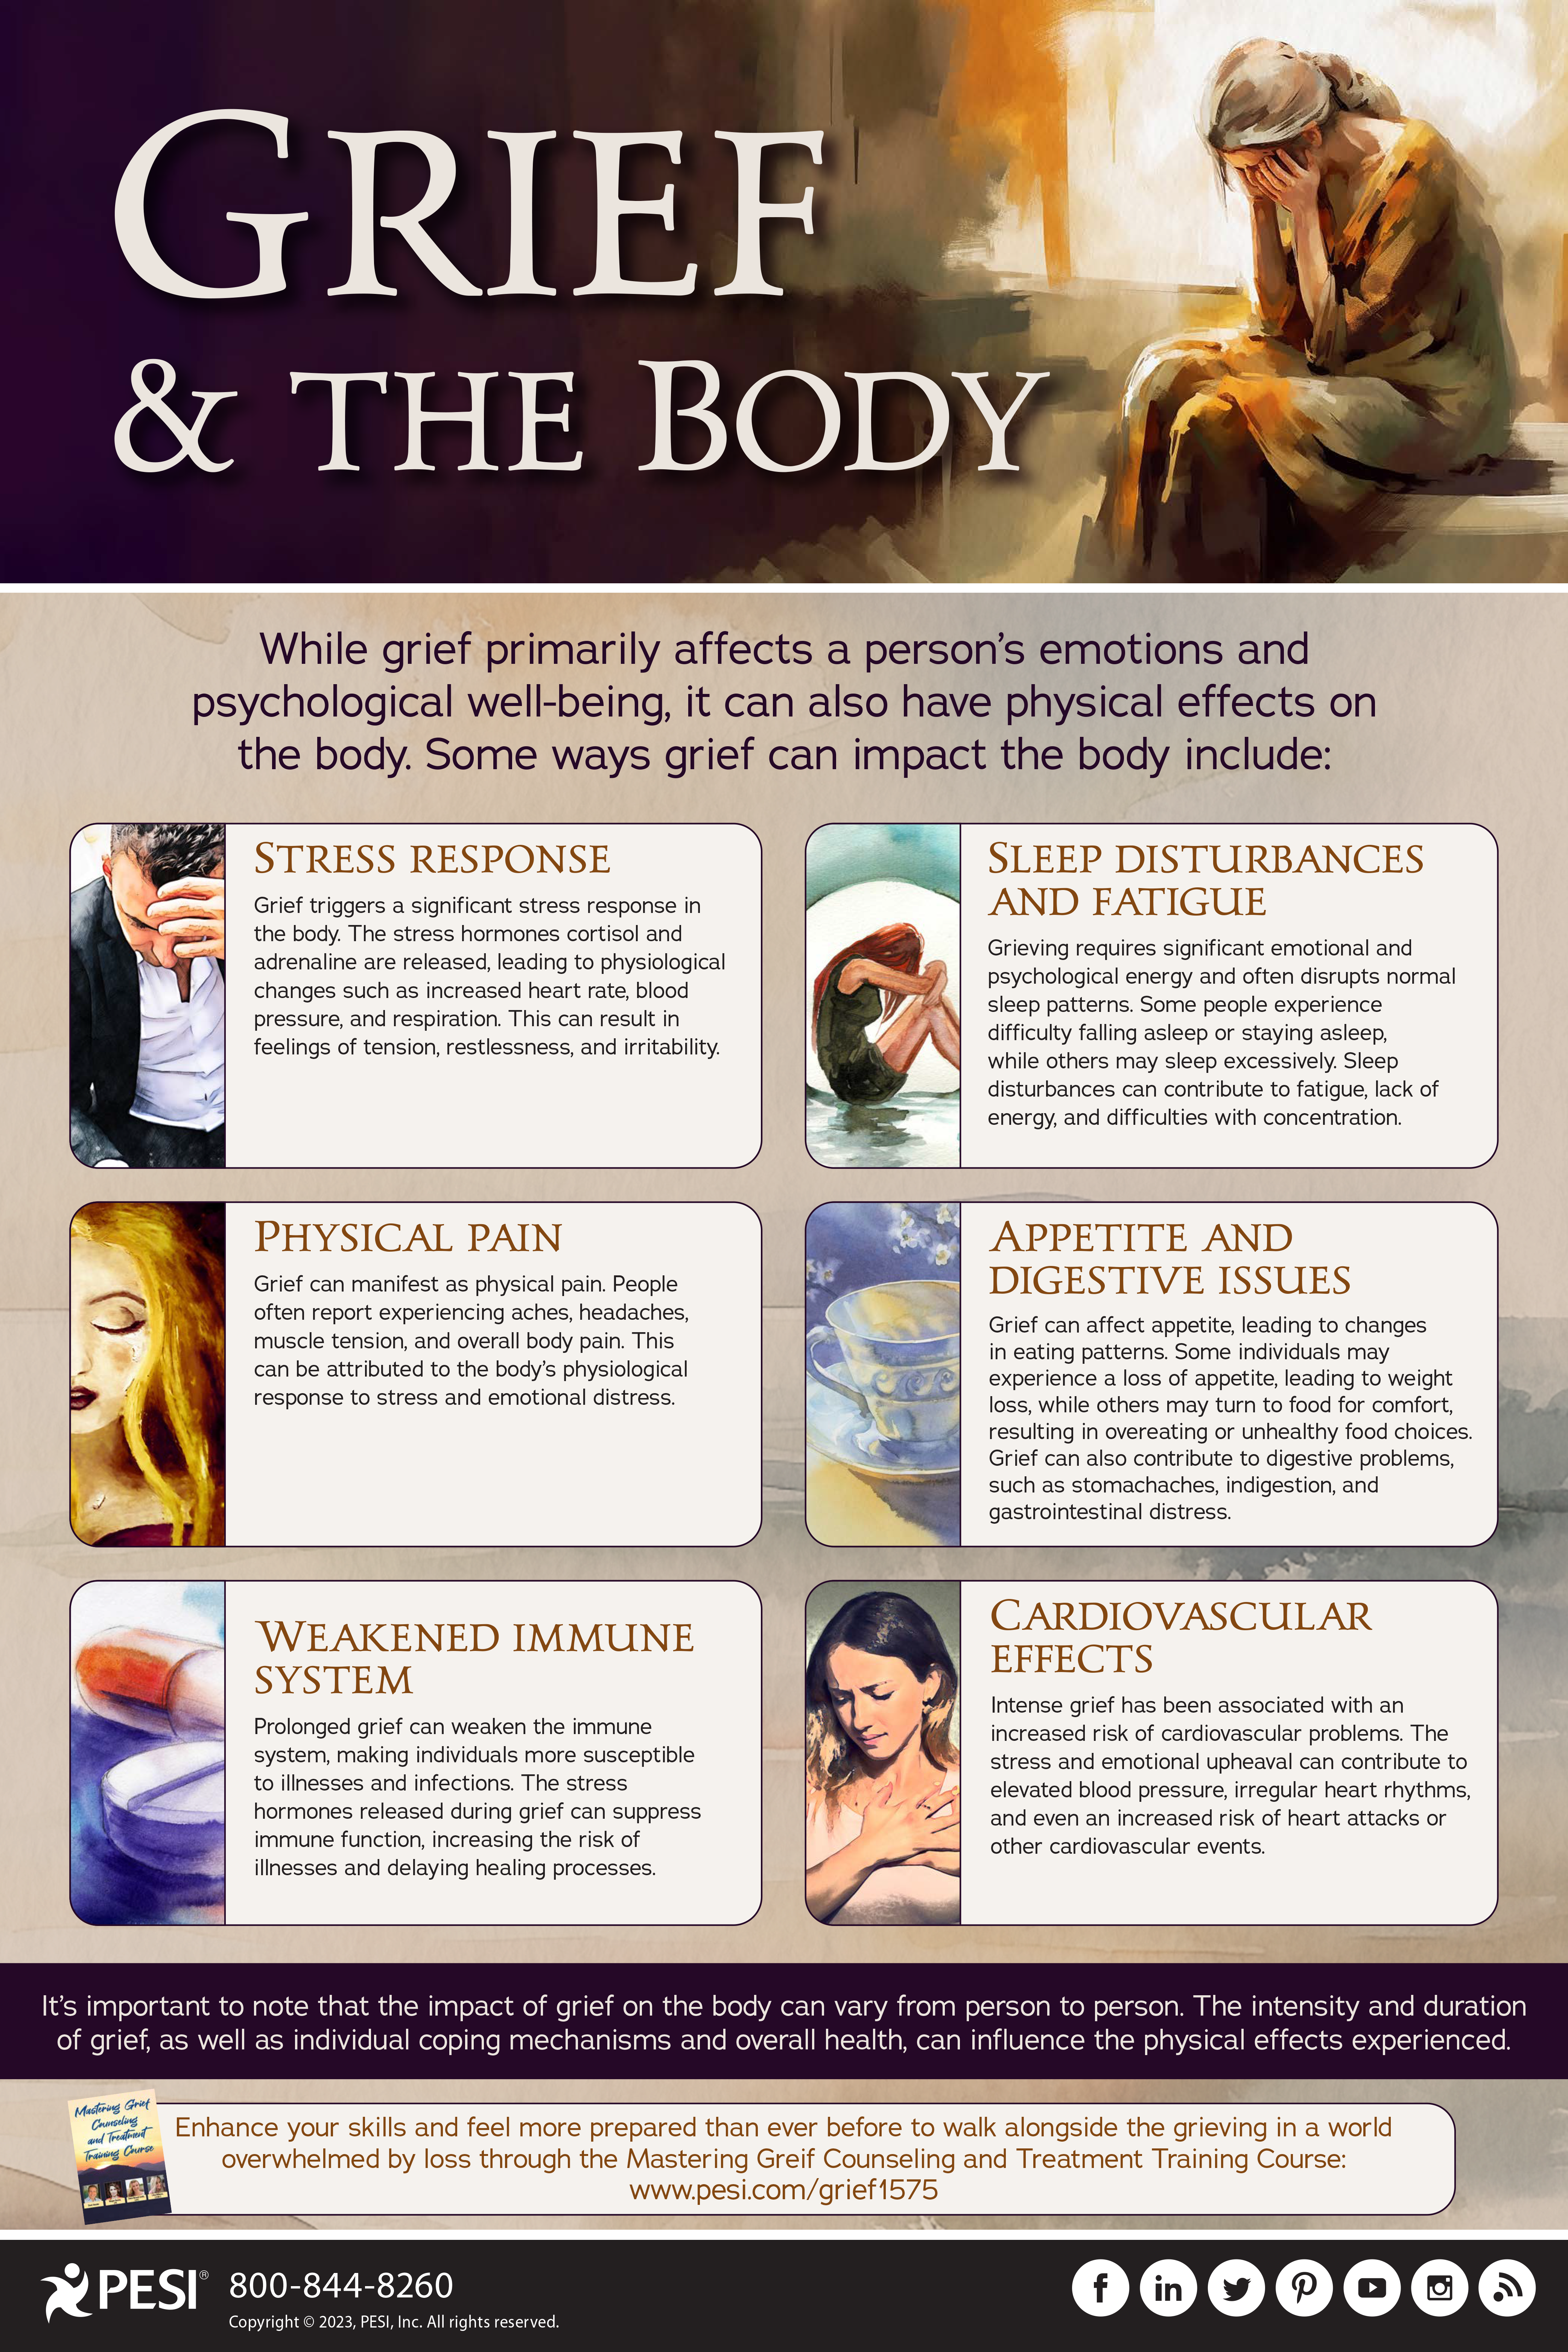 download the grief and the body infographic